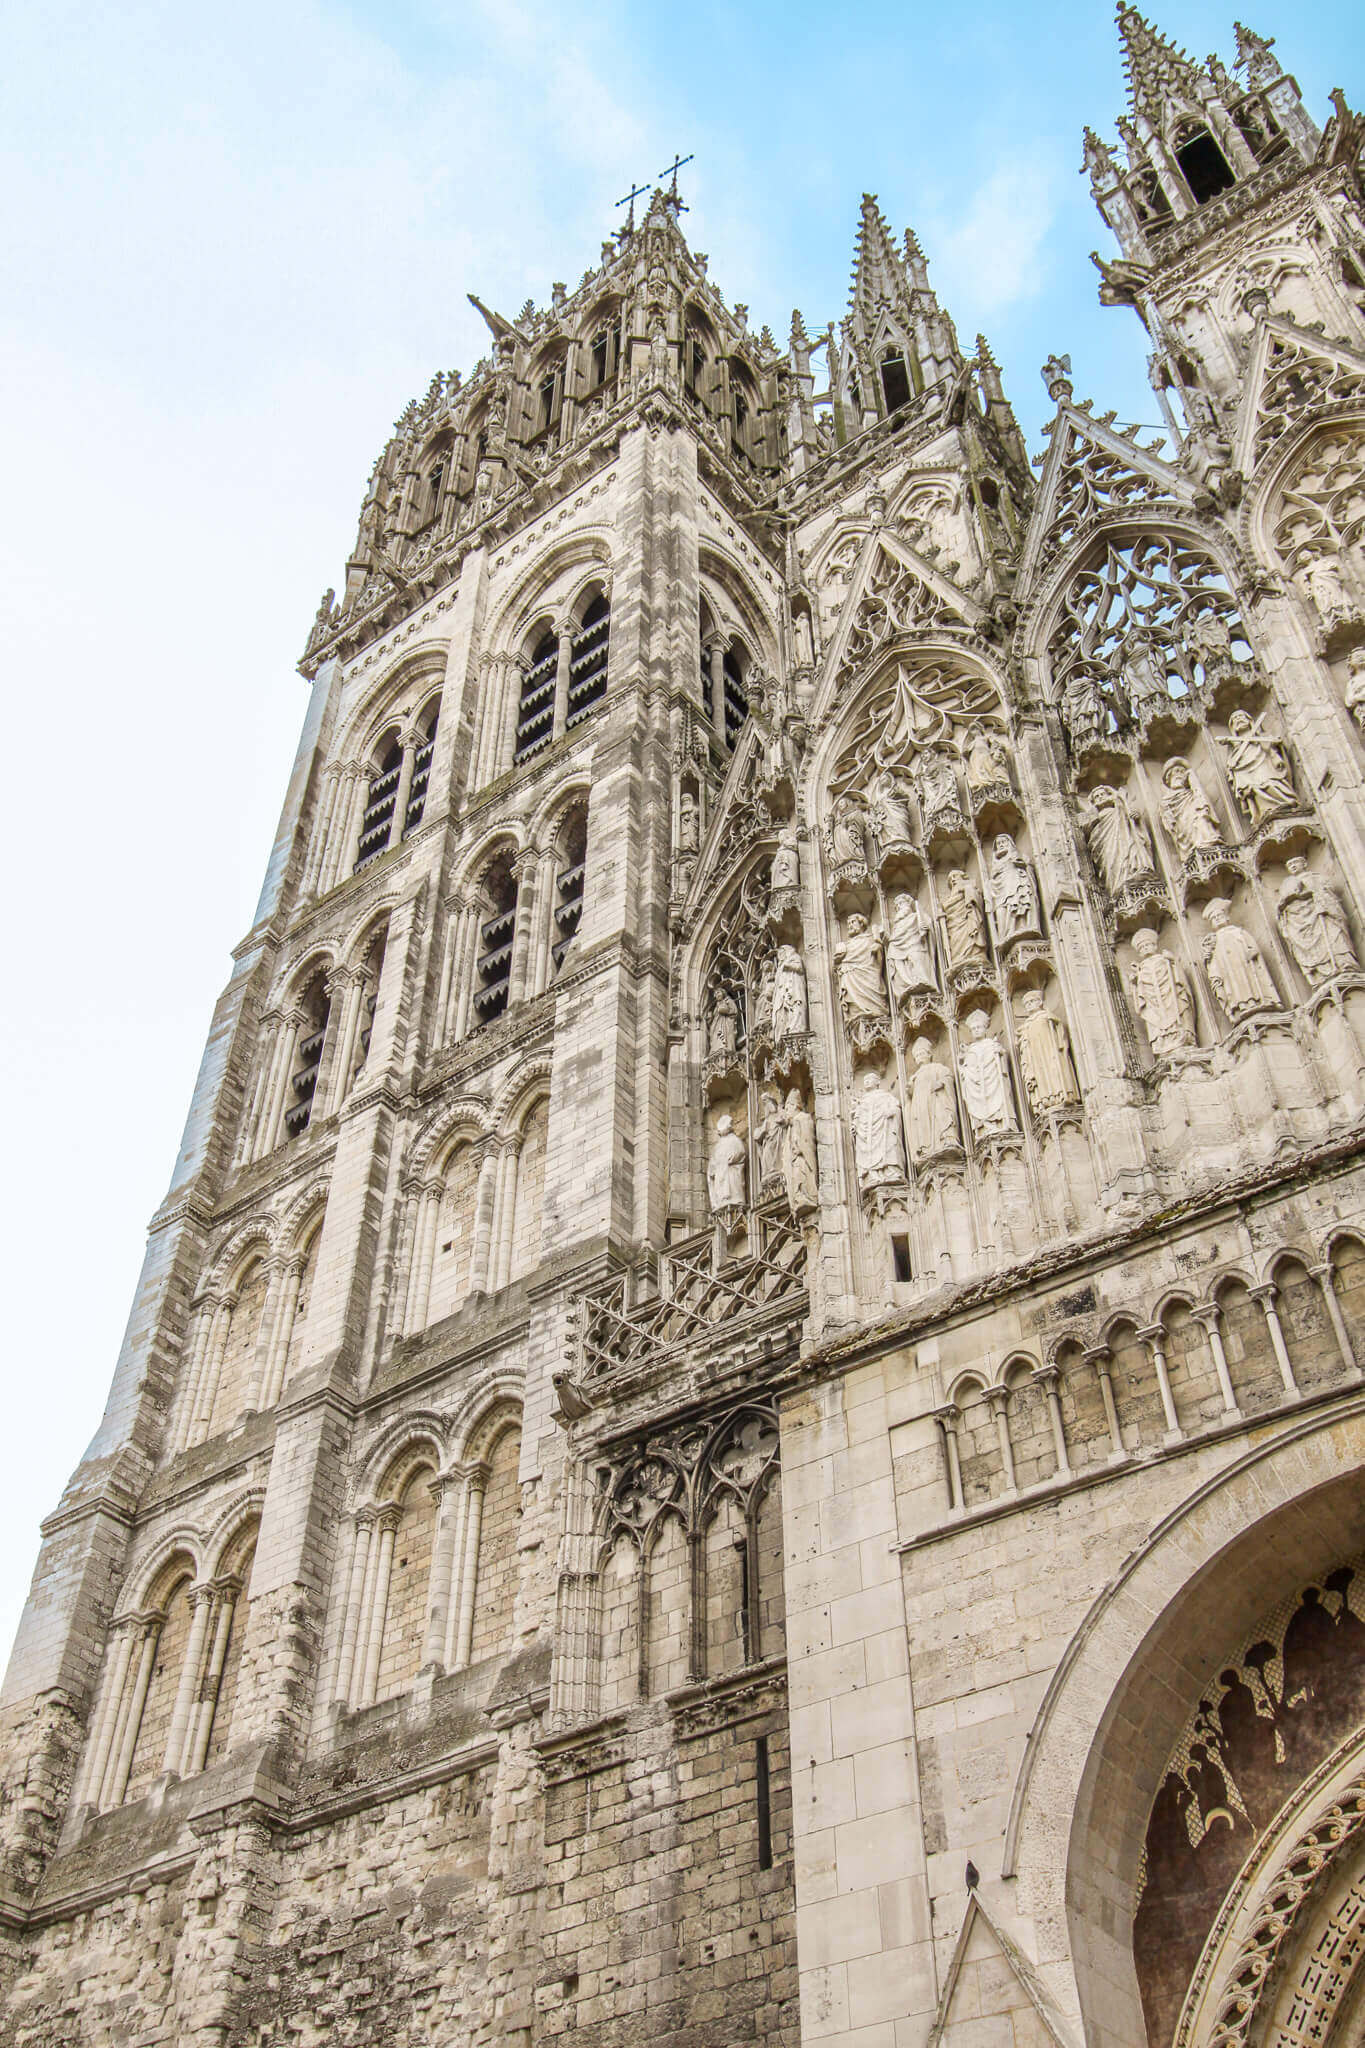 The facade of the Rouen Cathedral